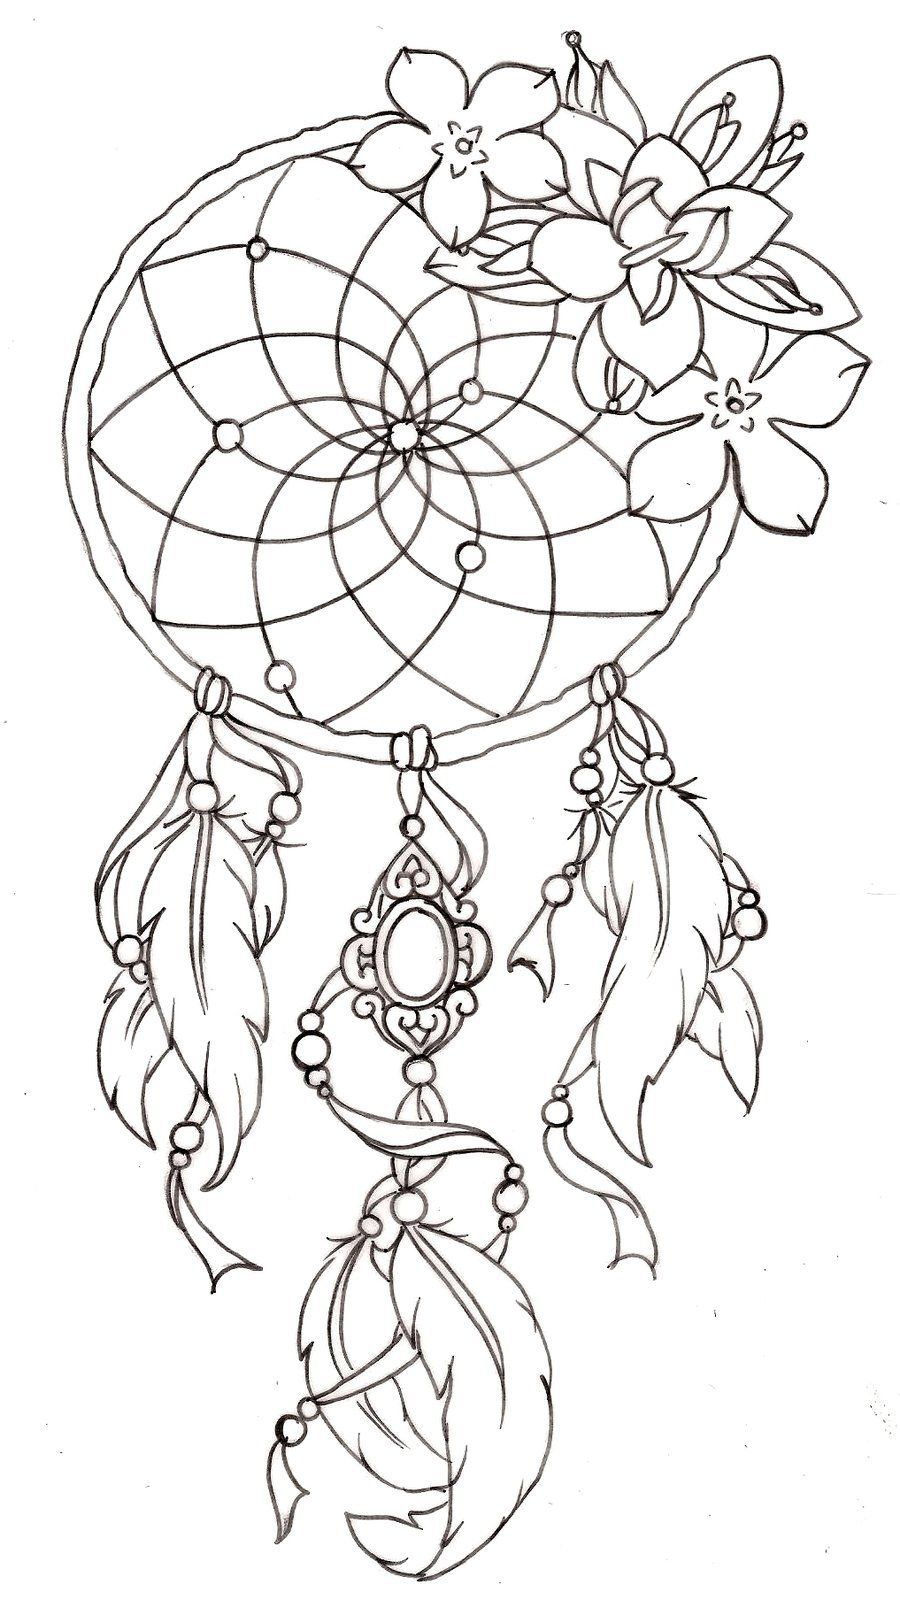 Dream Catcher Tattoo. Sooome day !!  This gives me more ideas for mine !! I never thought to incorporate flowers with it !  Now I